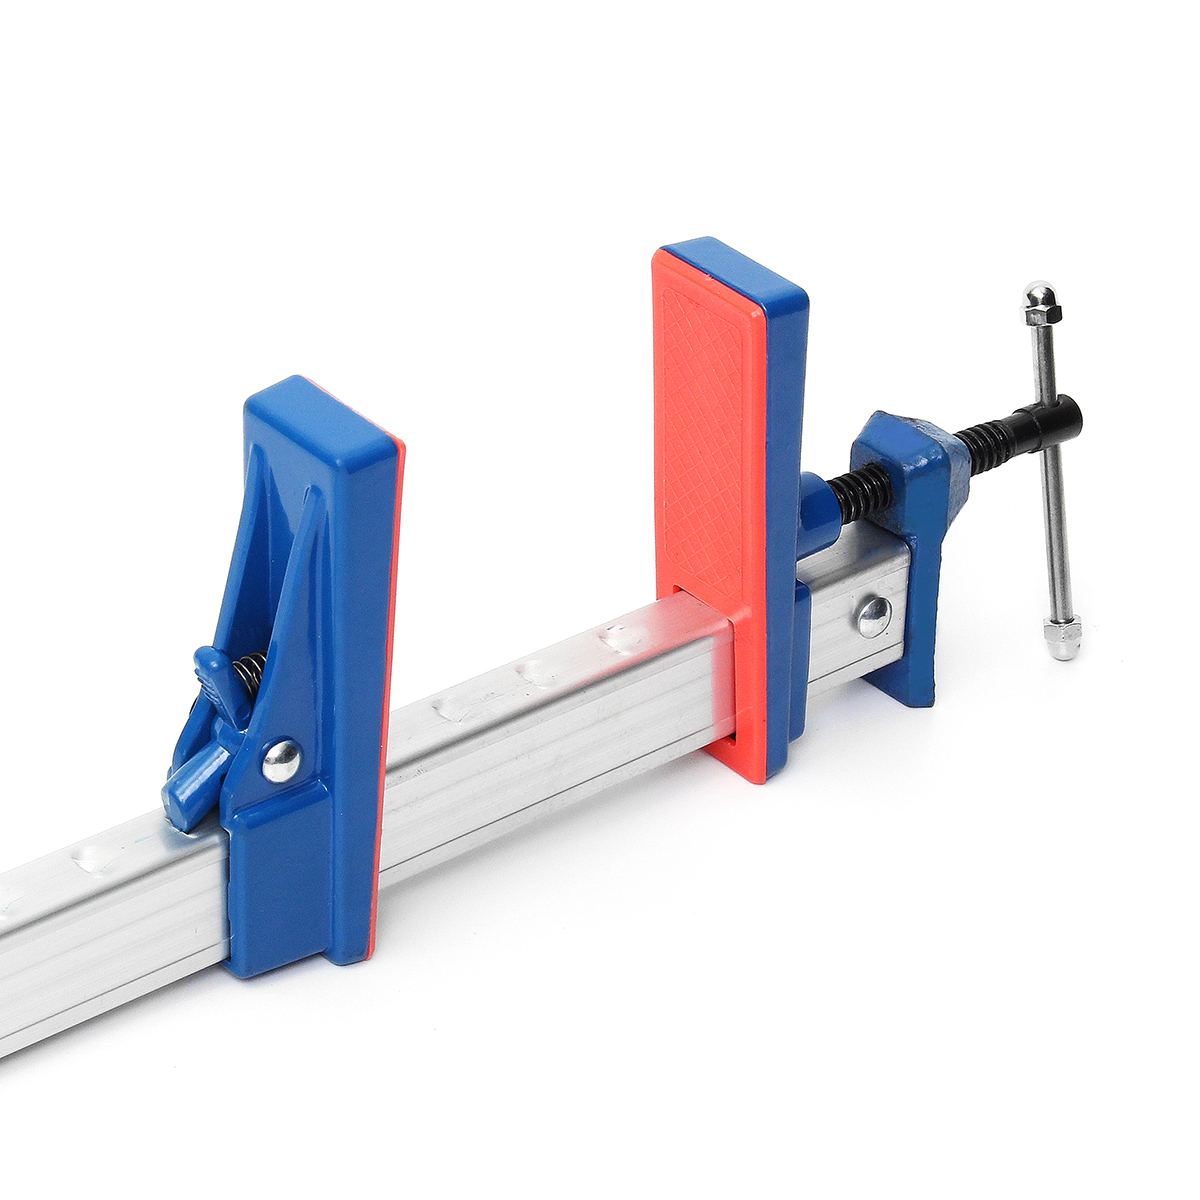 2436-Inch-Aluminum-F-Clamp-Bar-Heavy-Duty-Holder-Grip-Release-Parallel-Adjustable-Woodworking-Tool-1361735-8